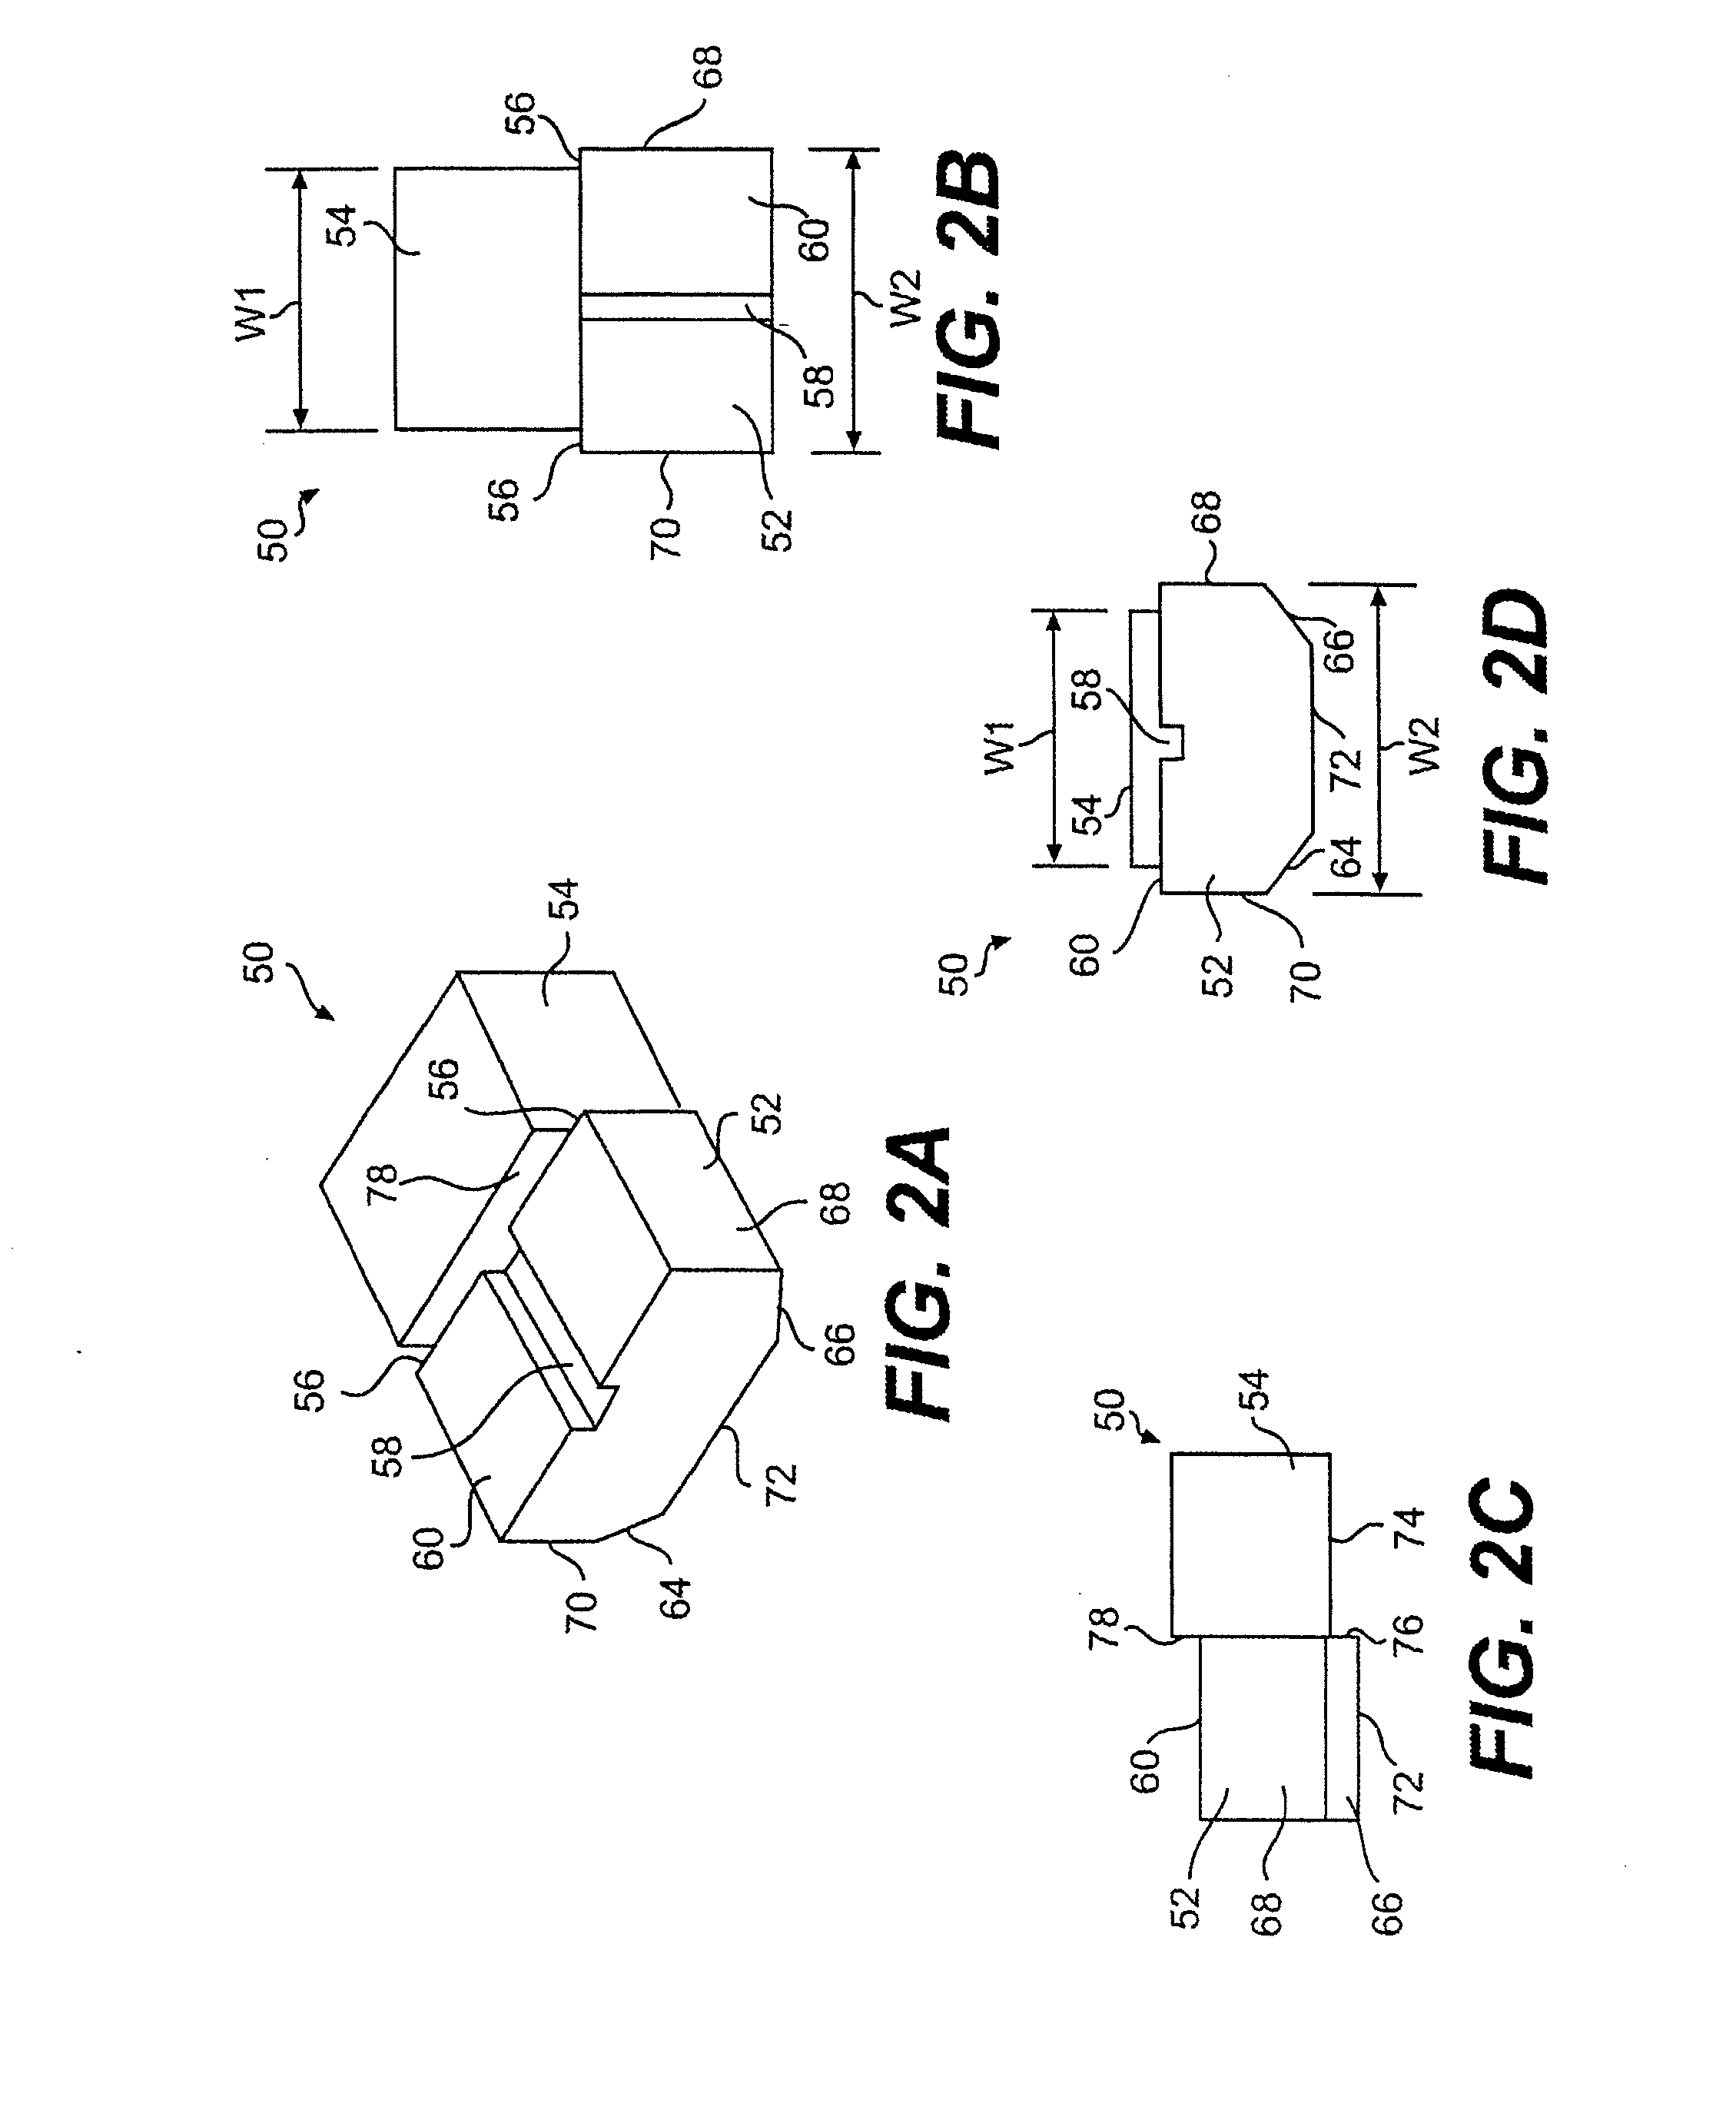 Apparatus and method for performing spinal surgery